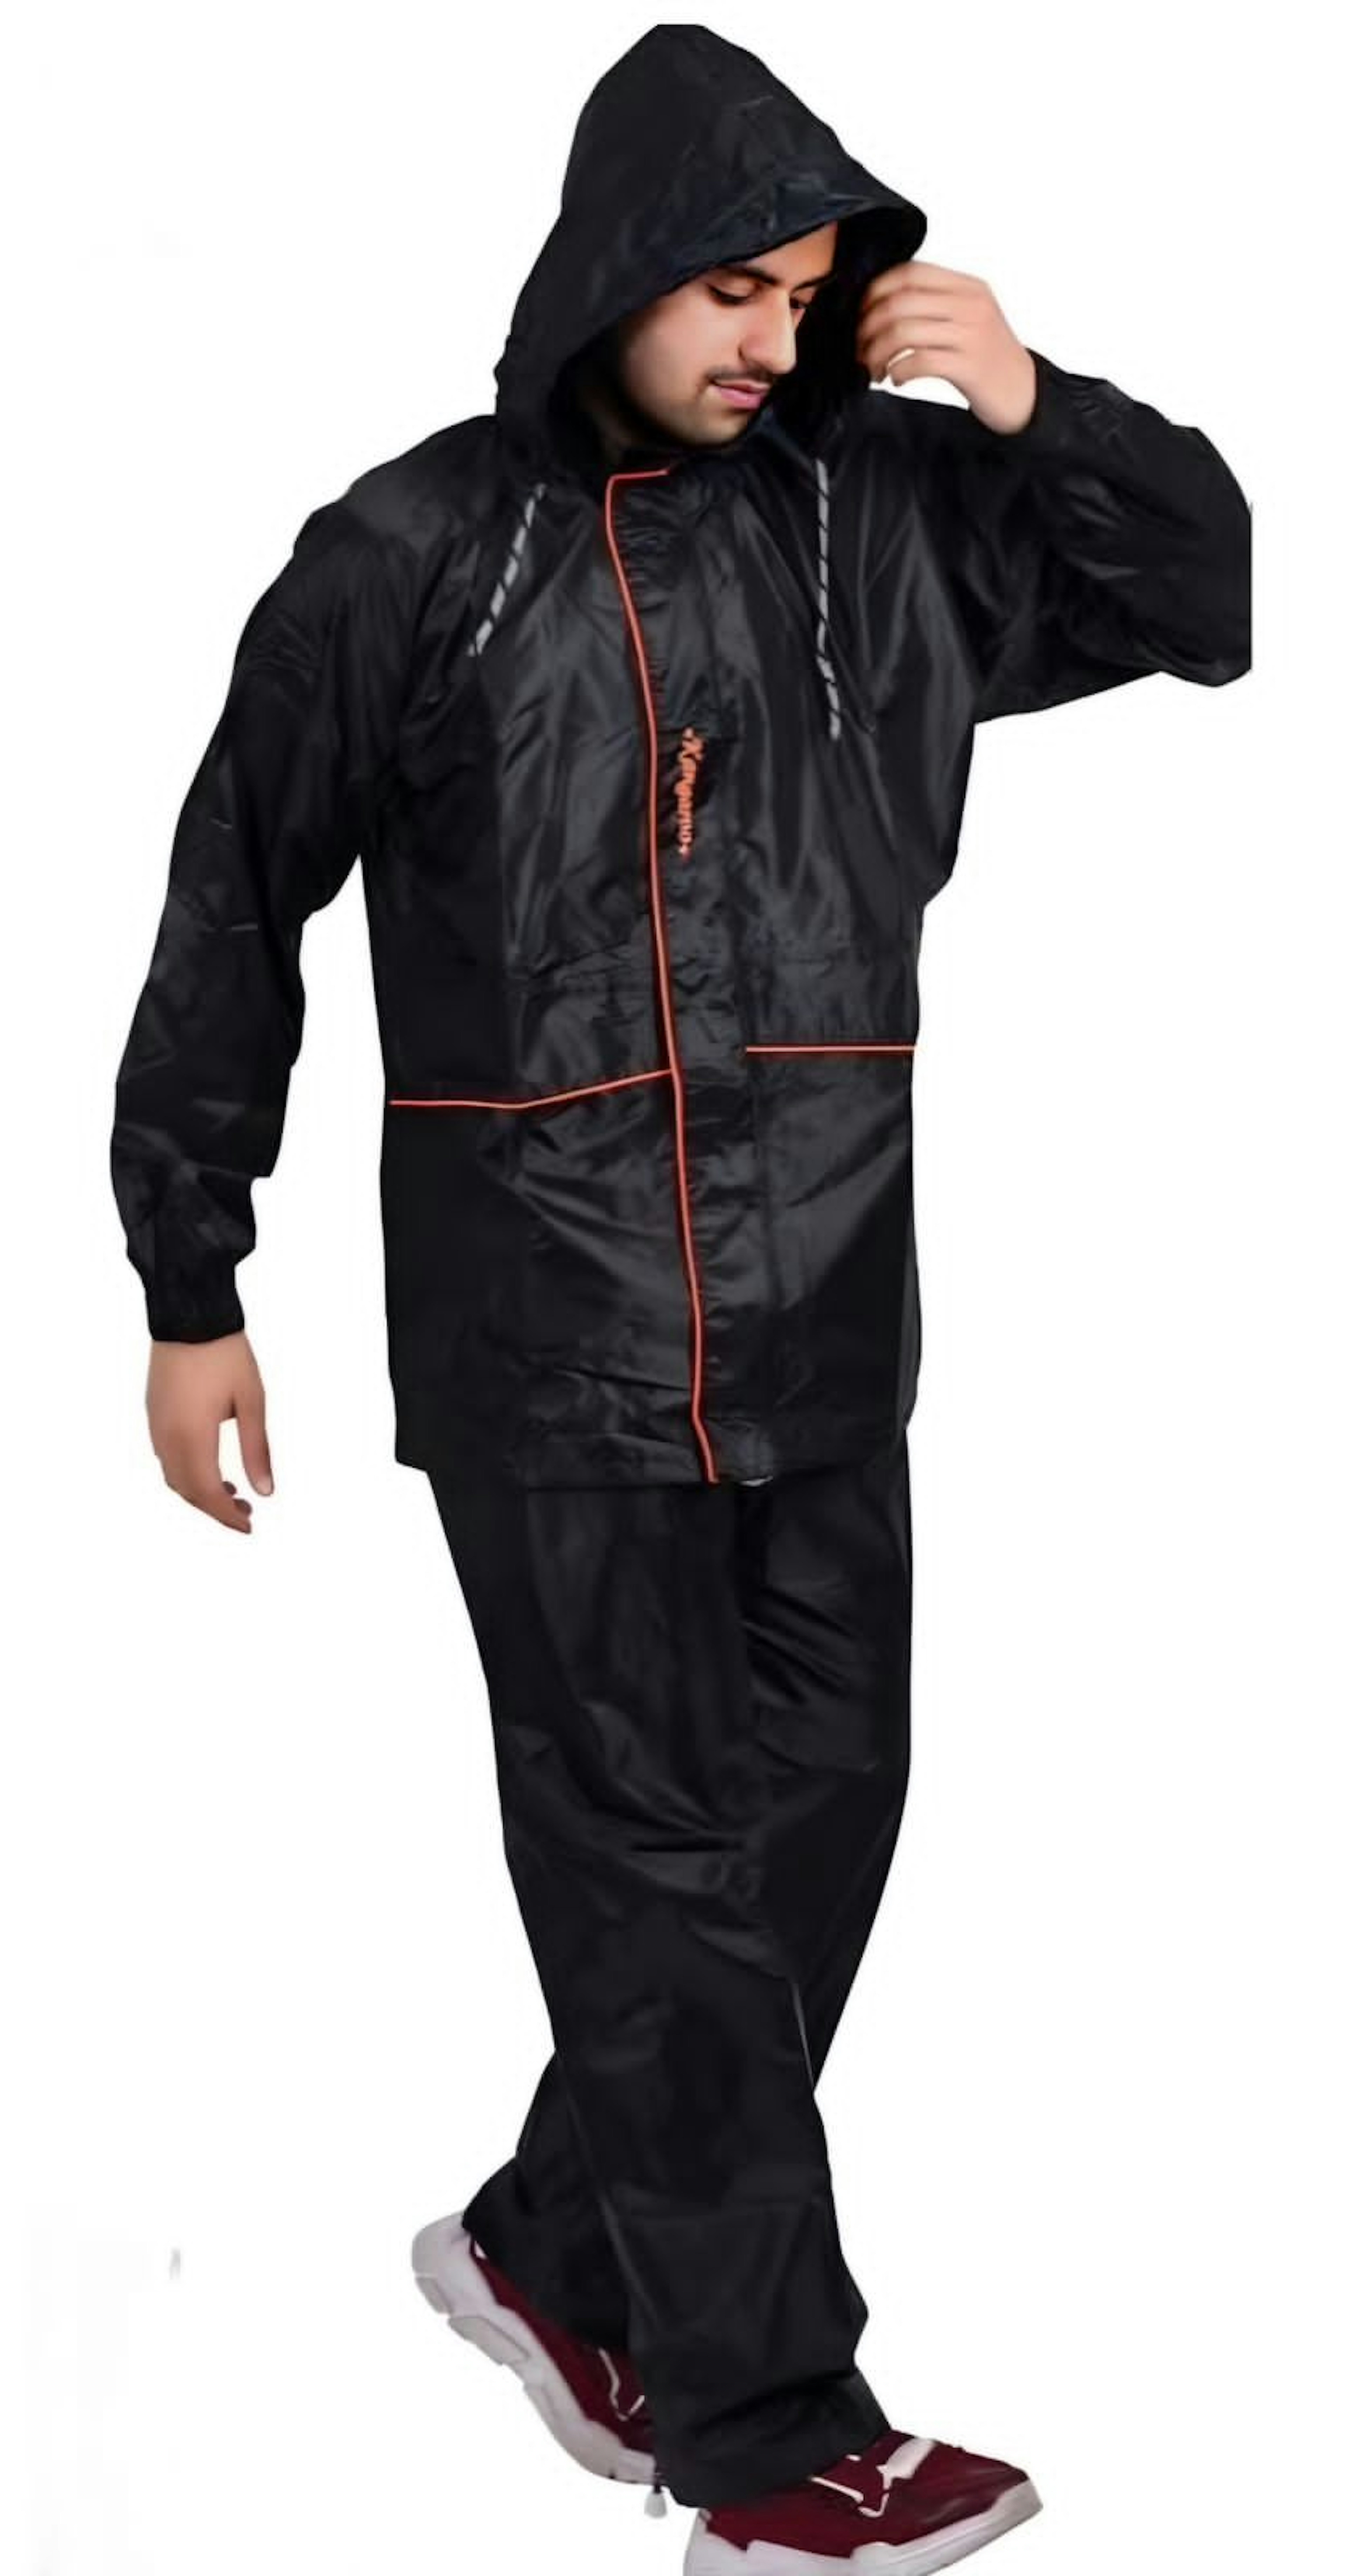 View - Rain suit  photos, Rain suit  available in Ahmedabad, make deal in 950